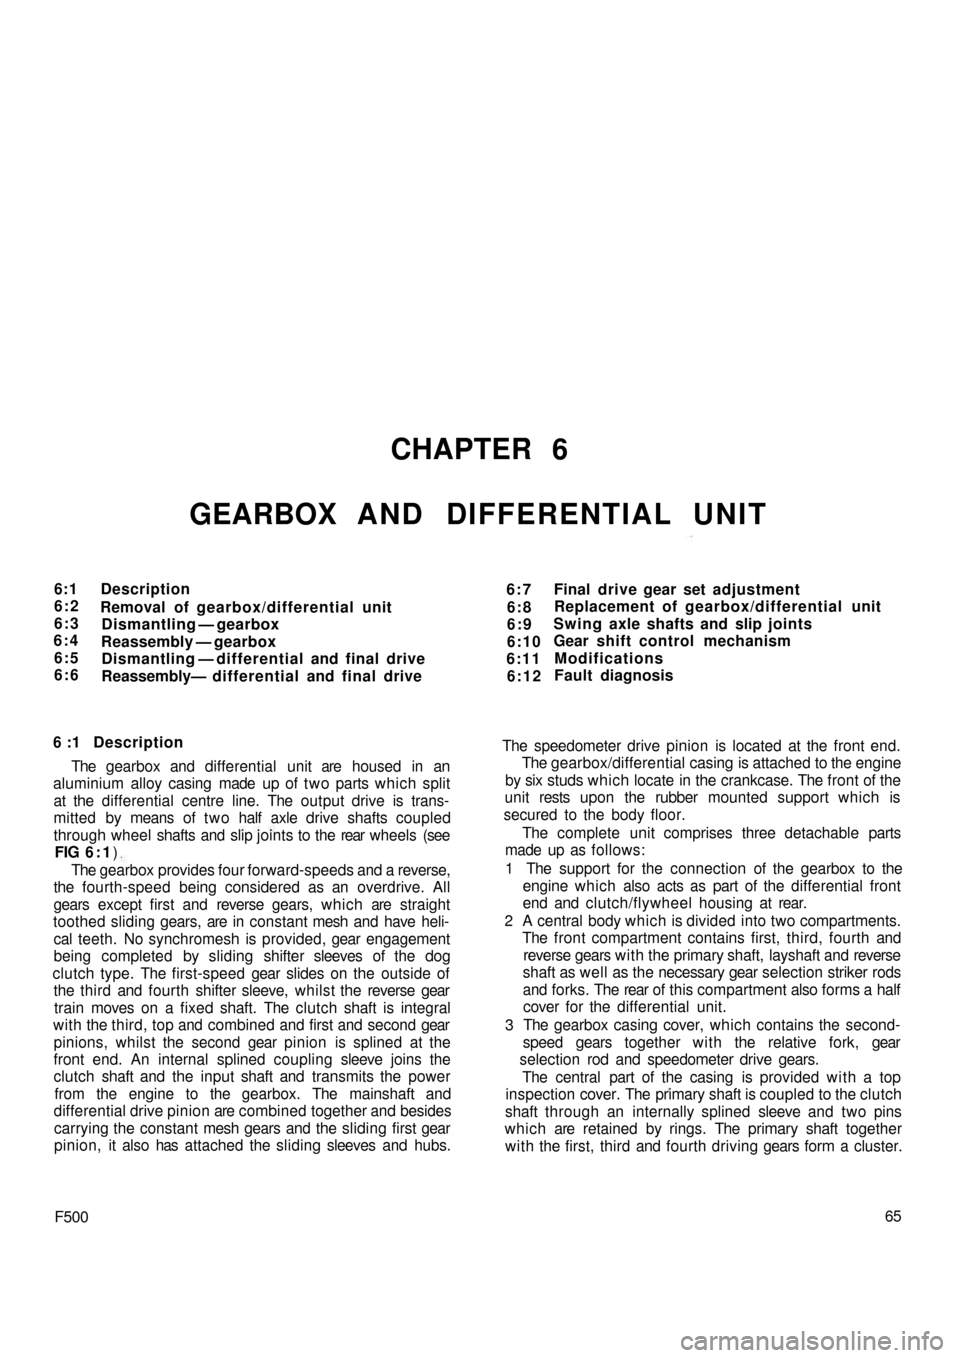 FIAT 500 1957 1.G Workshop Manual CHAPTER 6
GEARBOX AND DIFFERENTIAL UNIT
6:1
6:2
6:3
6:4
6:5
6:6Description
Removal of gearbox/differential unit
Dismantling — gearbox
Reassembly — gearbox
Dismantling — differential and final dr